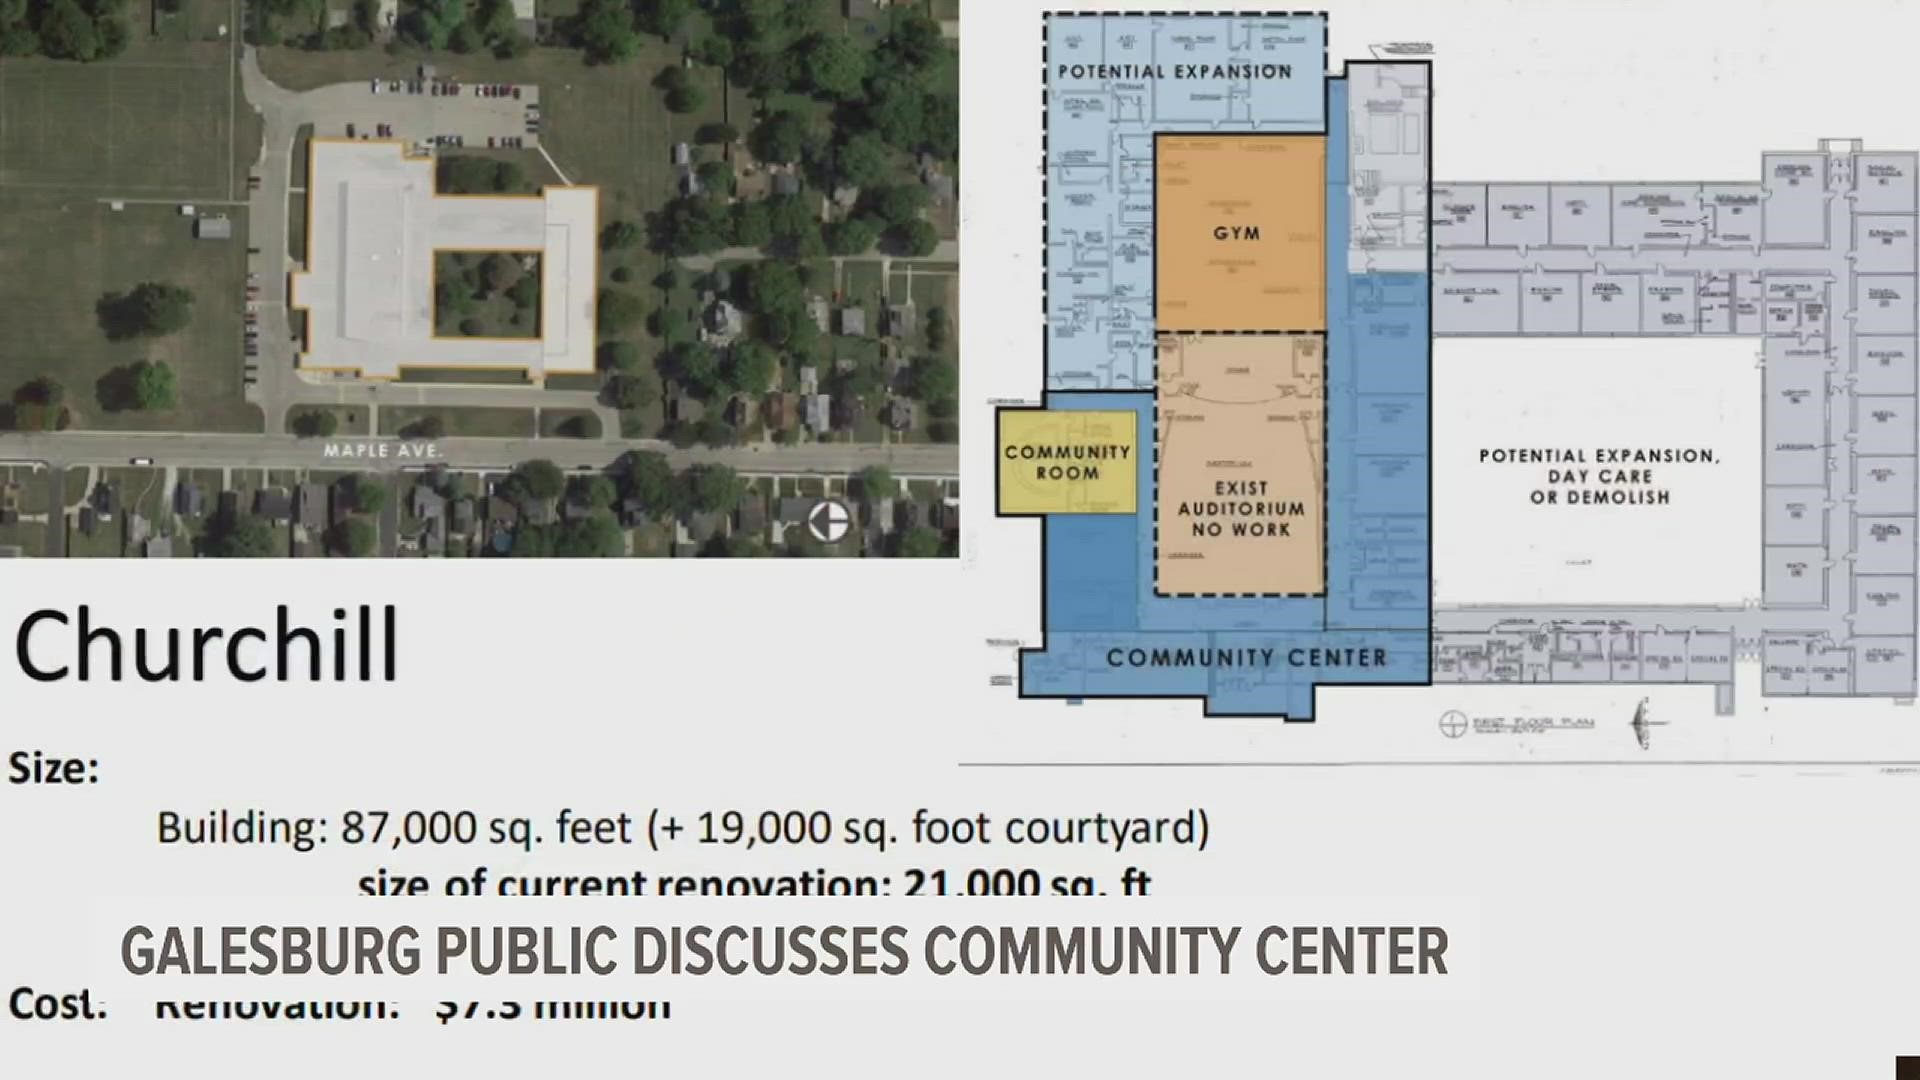 The City showed off its plans for the new community center in a Tuesday meeting and got a lot of feedback from residents on the $7 million project.